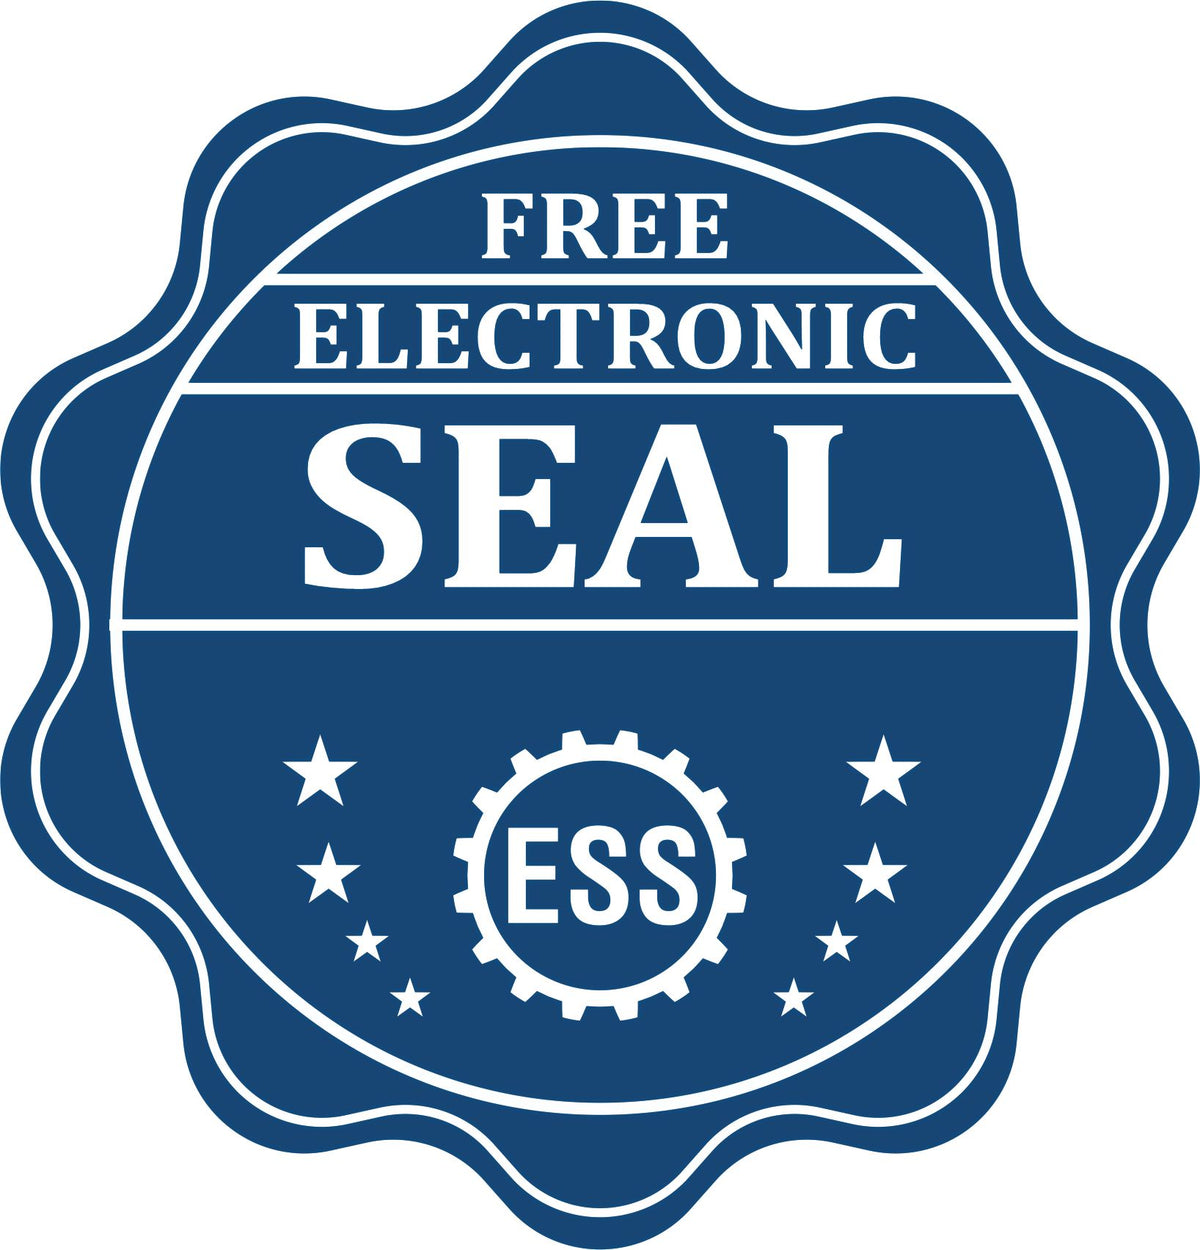 A badge showing a free electronic seal for the Heavy Duty Cast Iron Nevada Engineer Seal Embosser with stars and the ESS gear on the emblem.